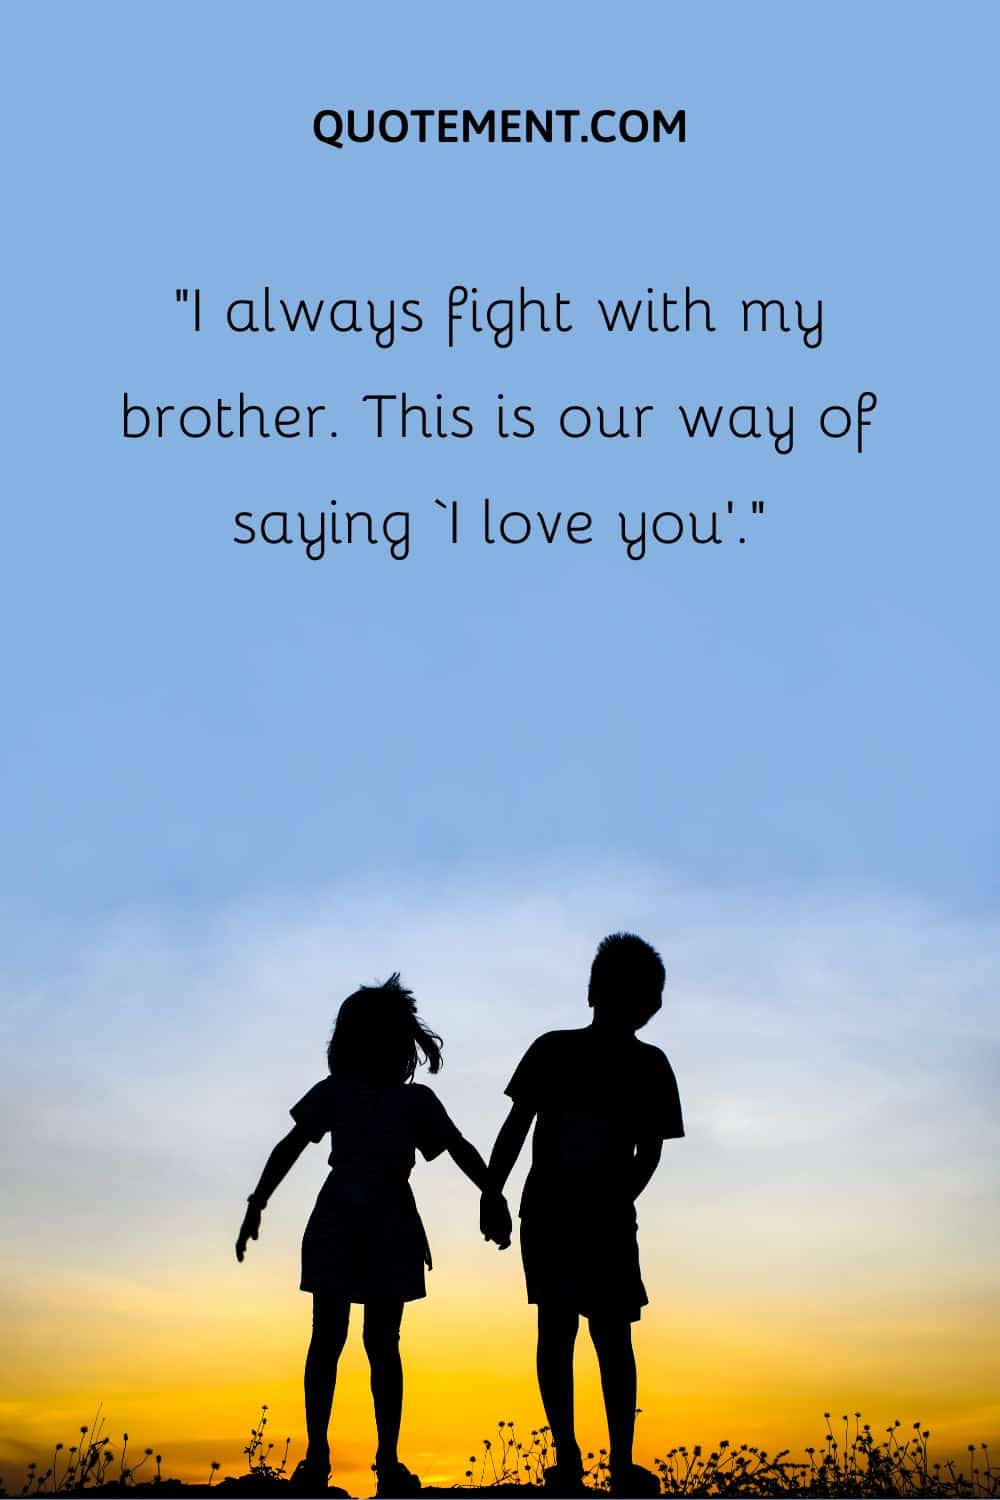 “I always fight with my brother. This is our way of saying ‘I love you’.”